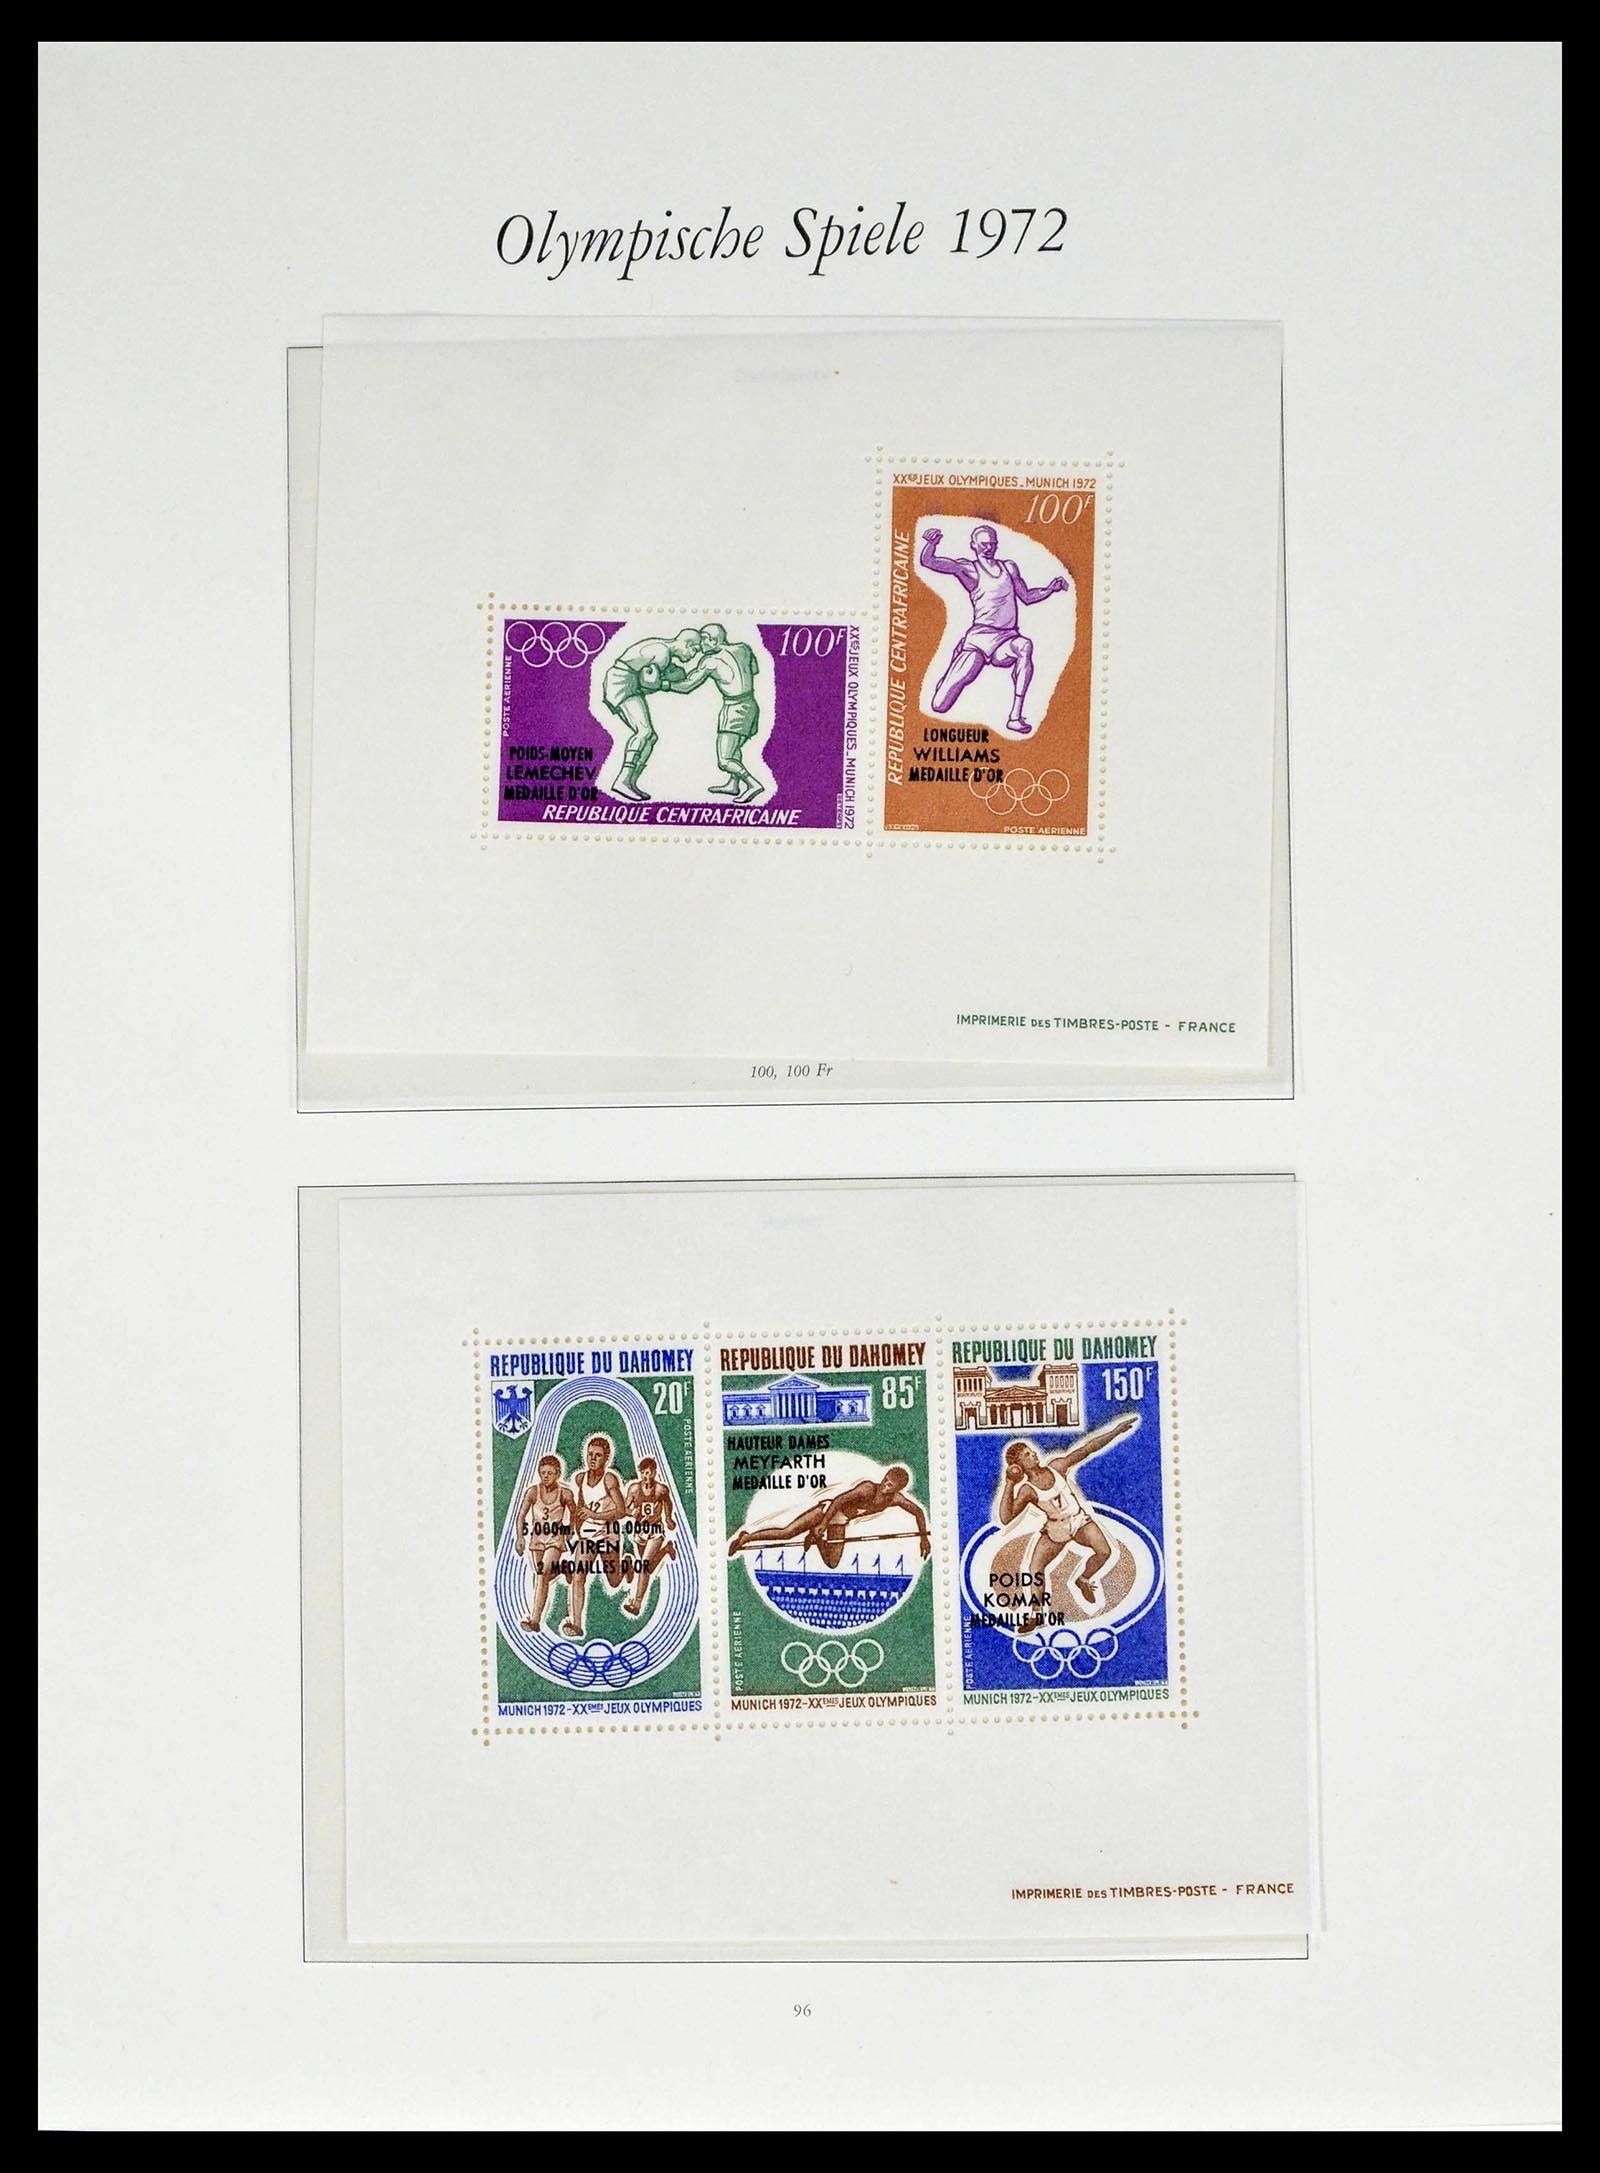 39237 0040 - Stamp collection 39237 Olympics 1972.